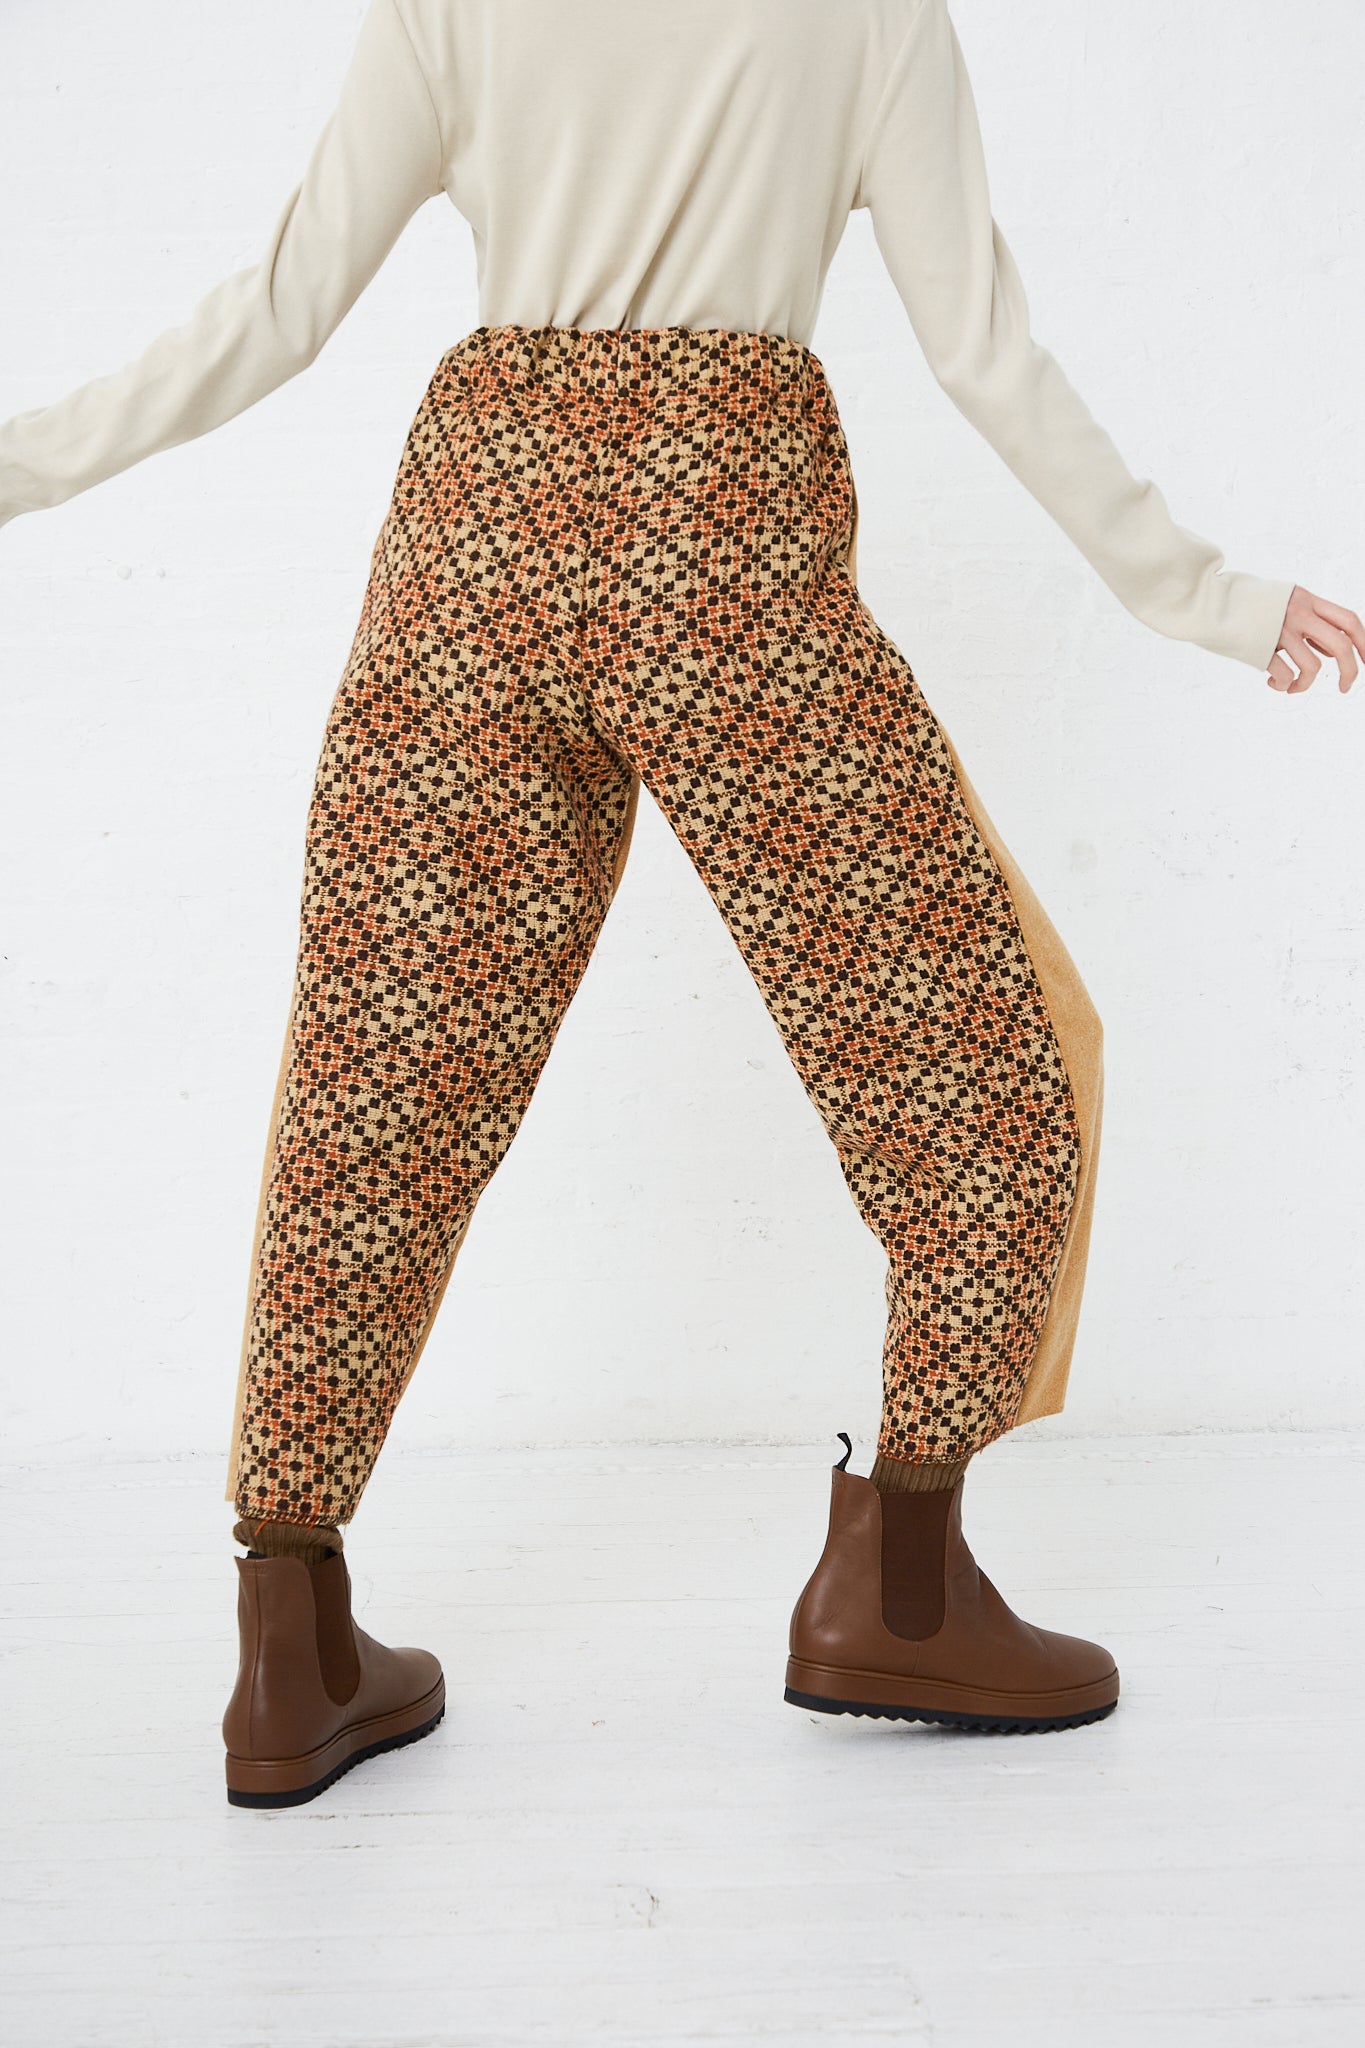 A woman wearing Thank You Have A Good Day's Wool Contrast Project Suit in Mustard harem pants. Back view.